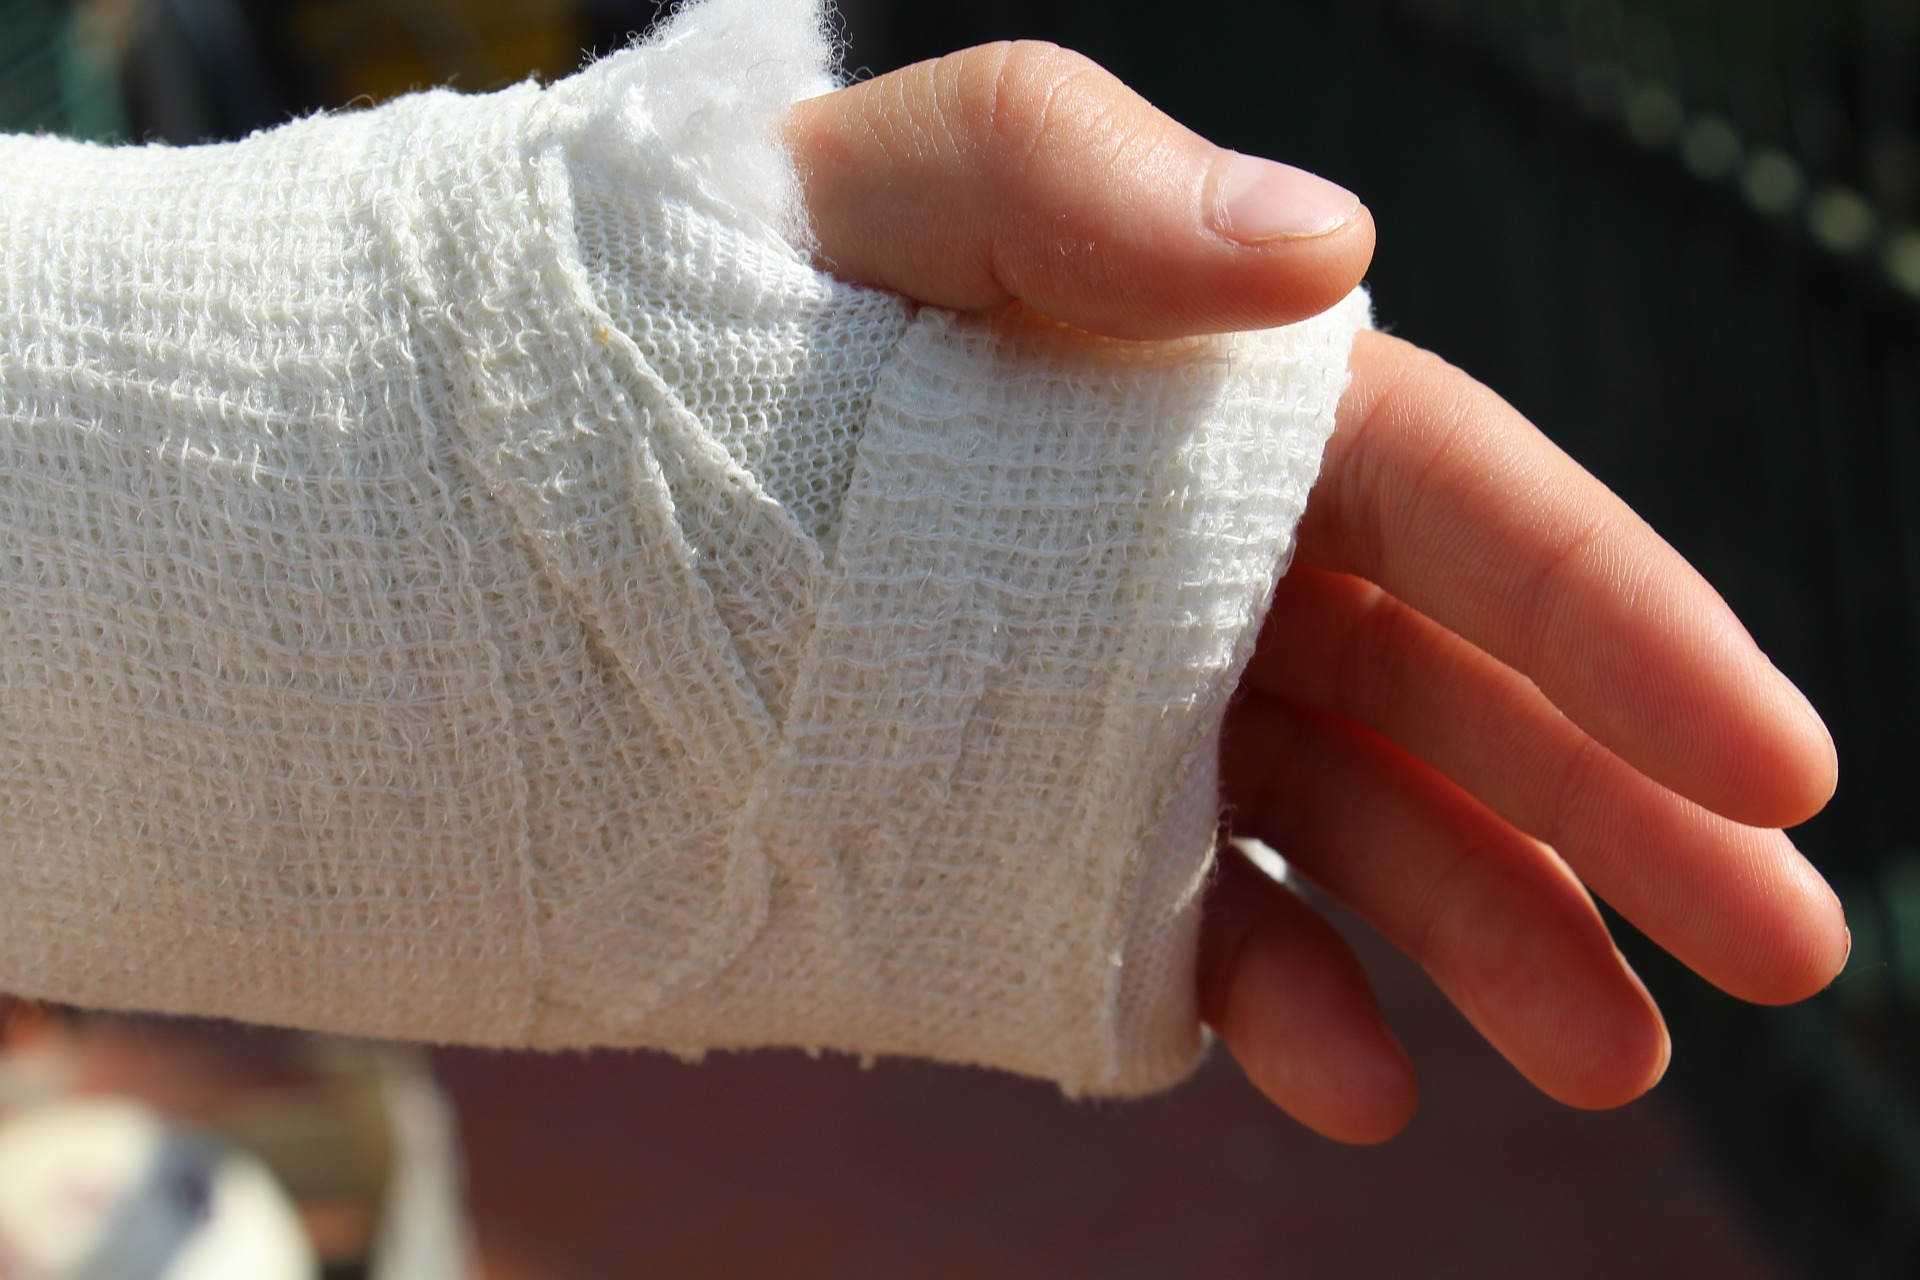 motorcycle accident hand injury 